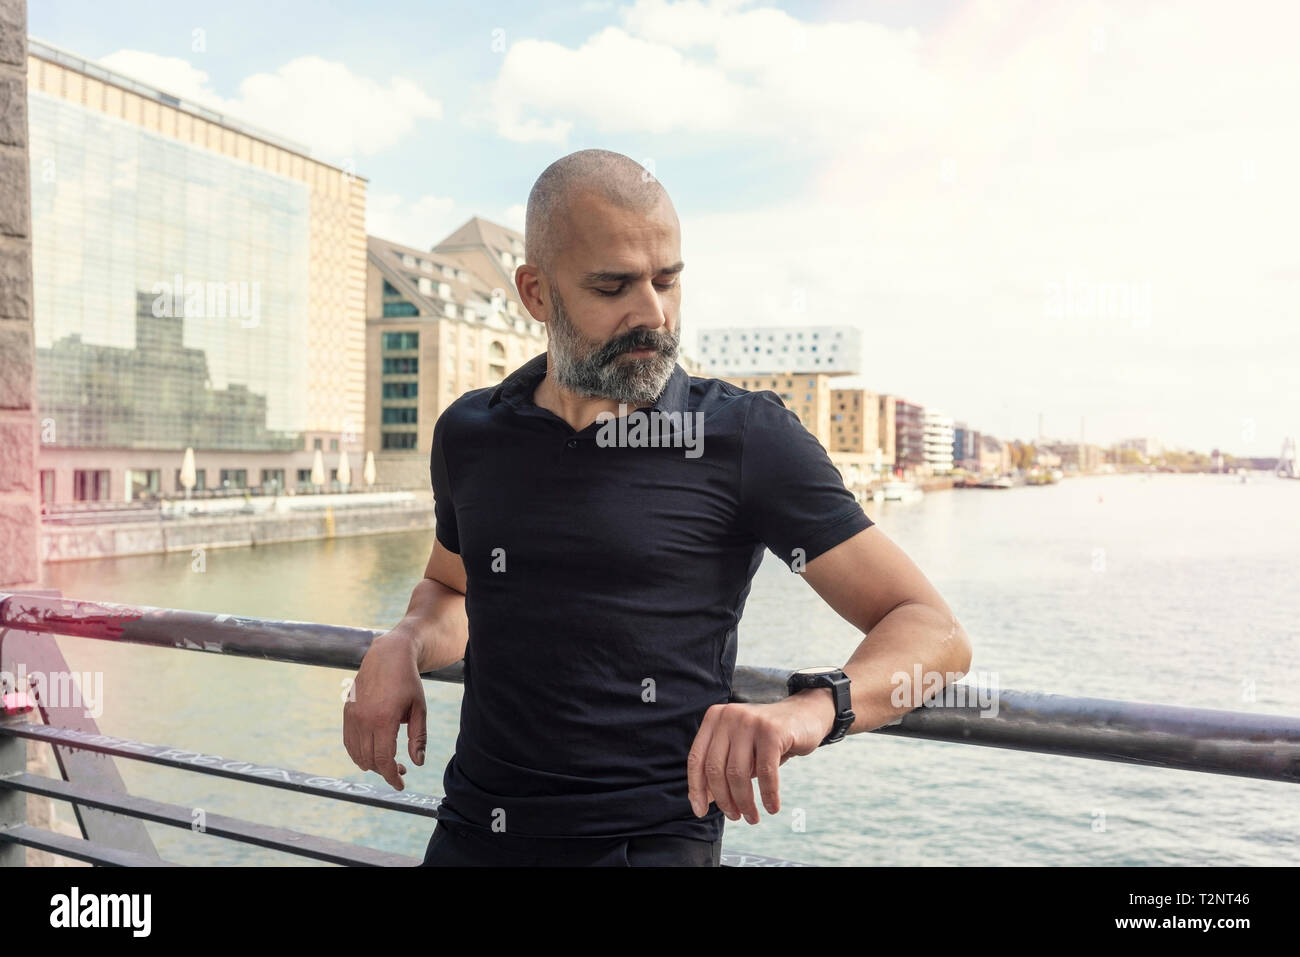 Man looking at smartwatch on bridge, river and buildings in background, Berlin, Germany Stock Photo